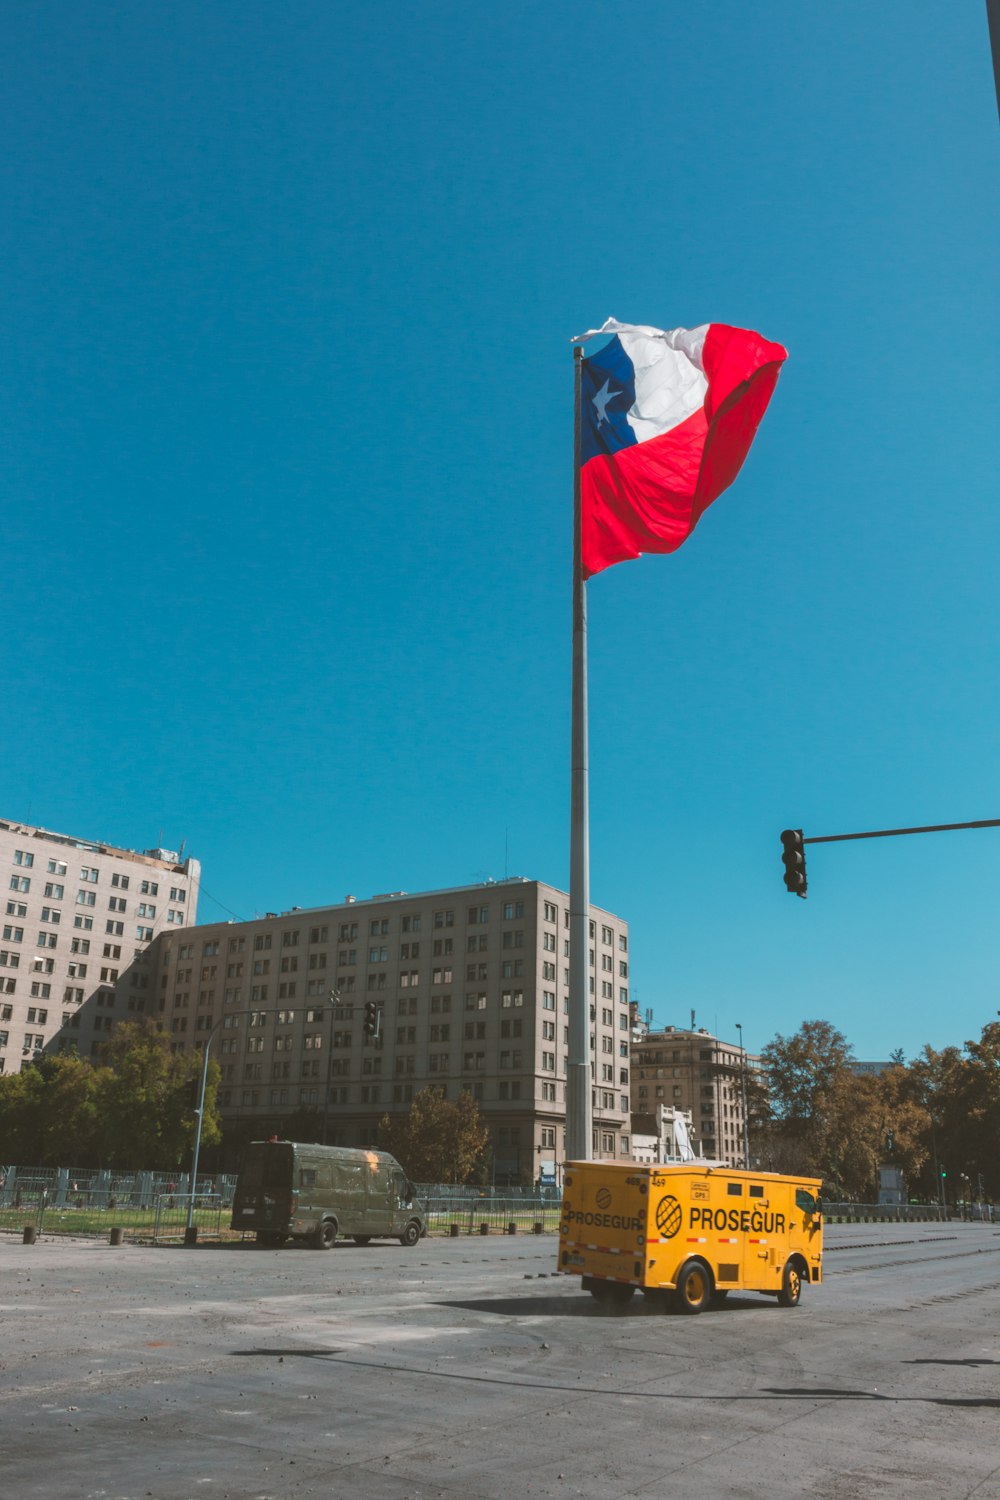 white red and blue flag on pole during daytime